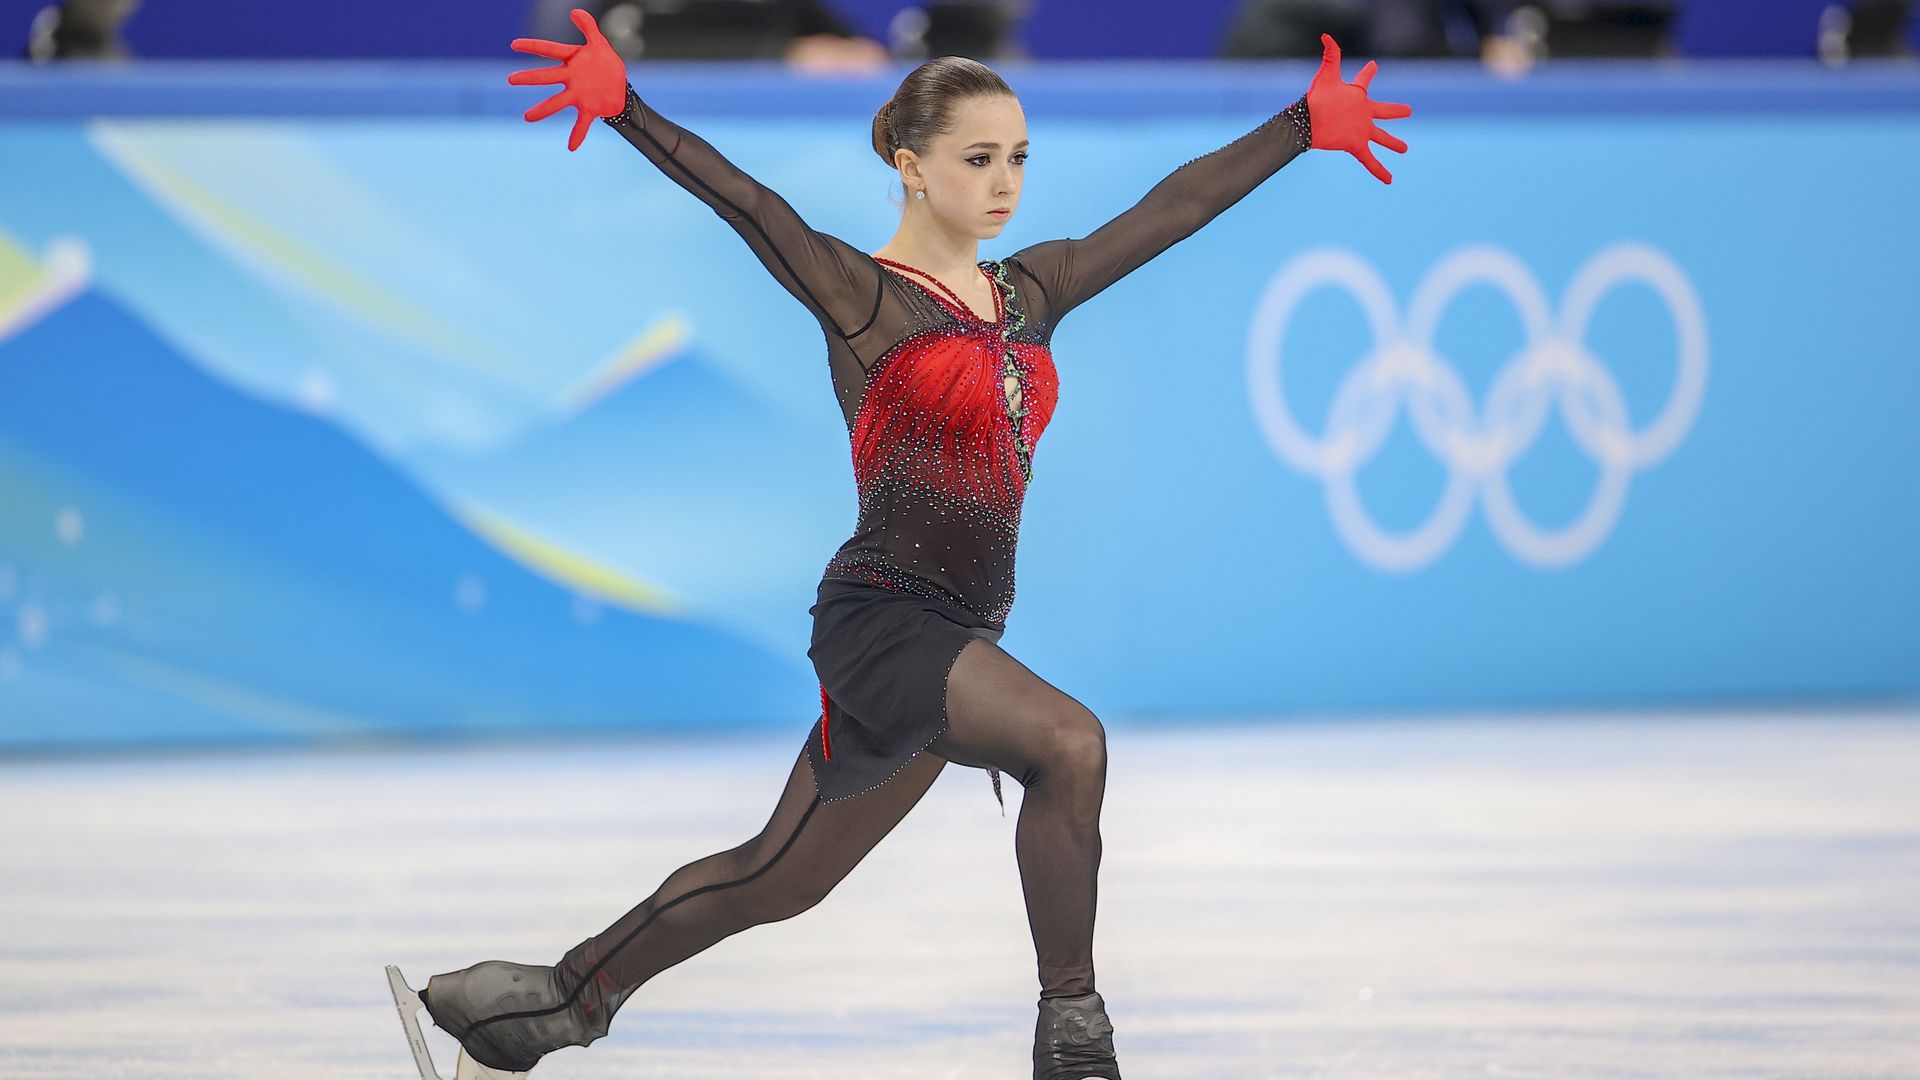 Kamila Valieva performing during the Beijing 2022 Winter Olympic Games.